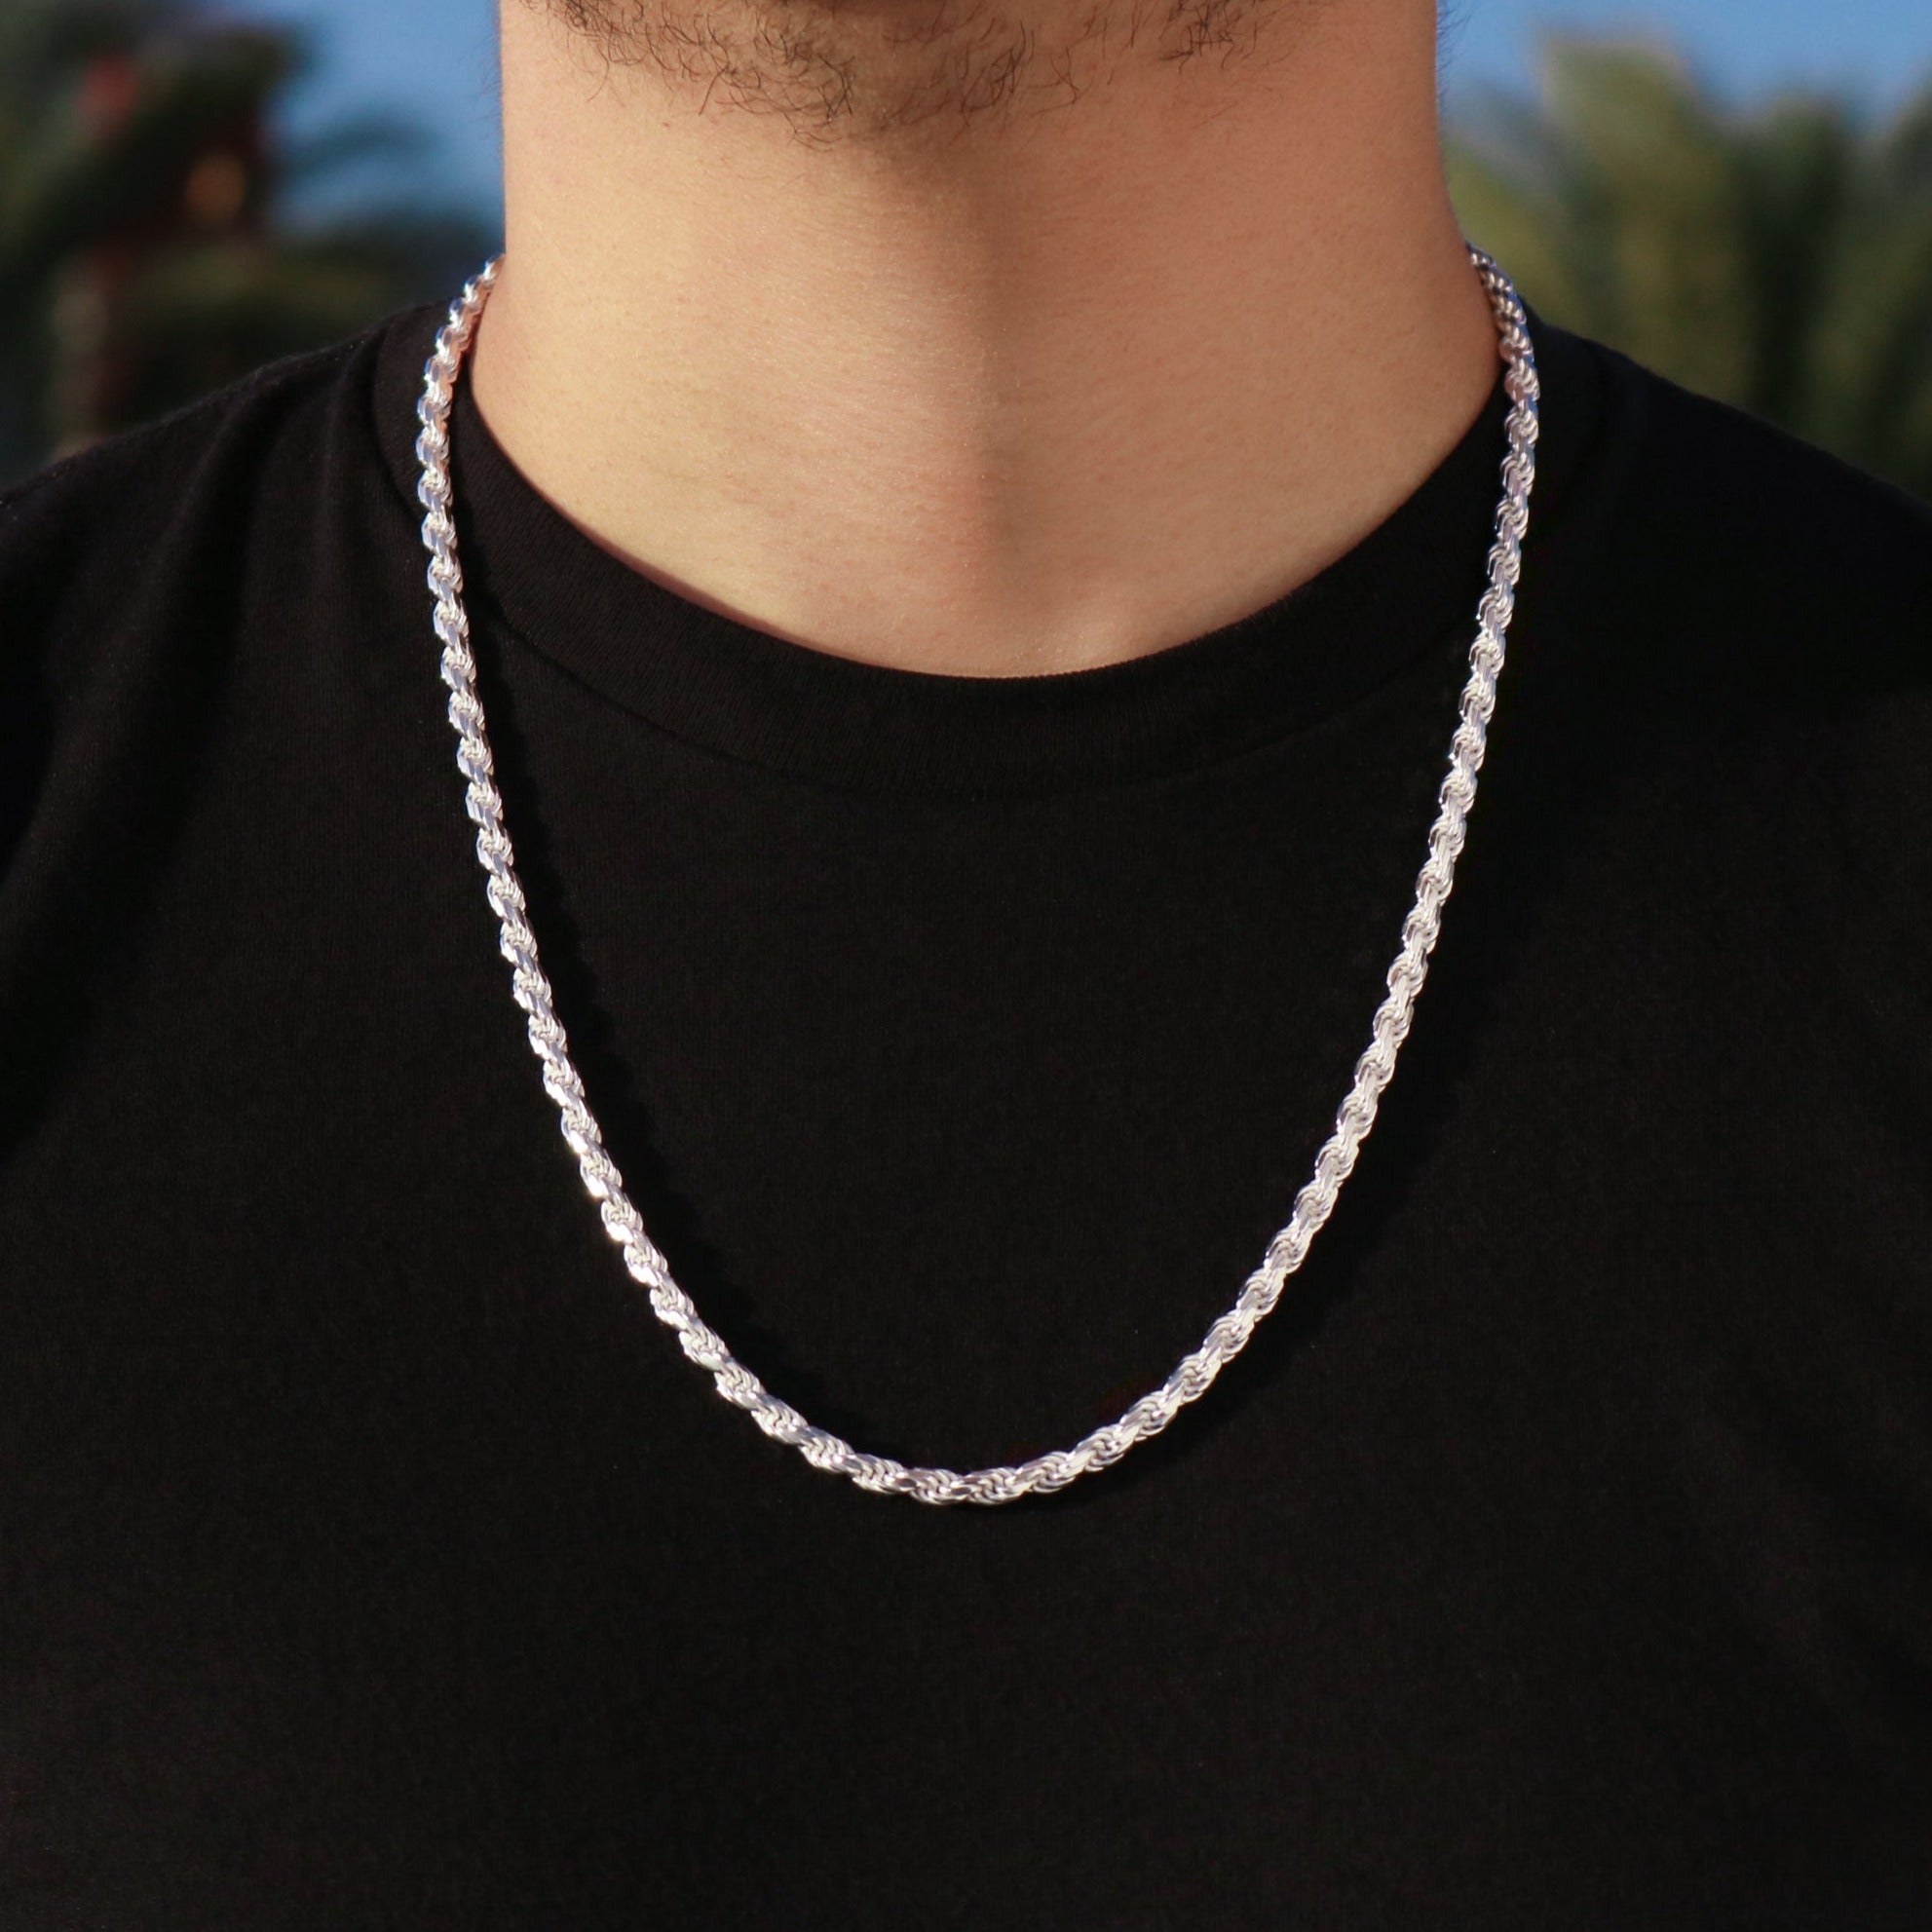 5mm Rope Chain - Real 925 Silver 18”